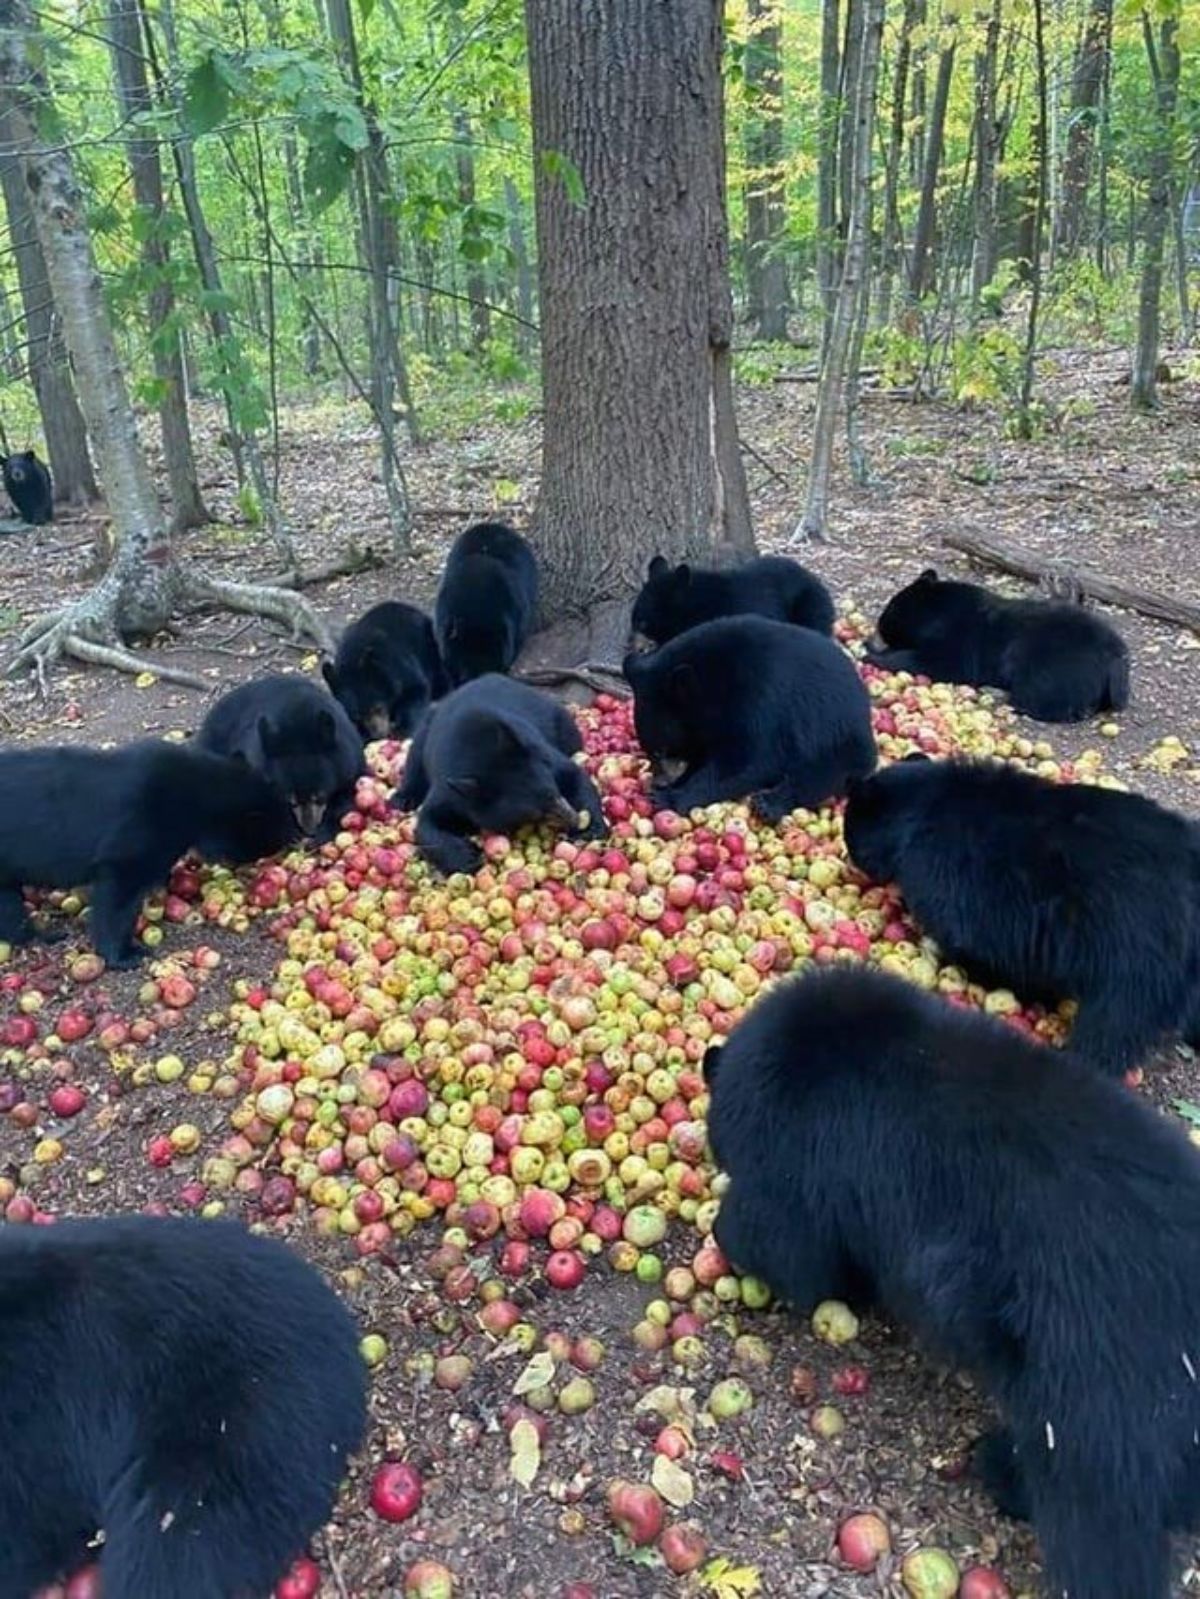 a group of black bears under a tree eating from a huge pile of apples